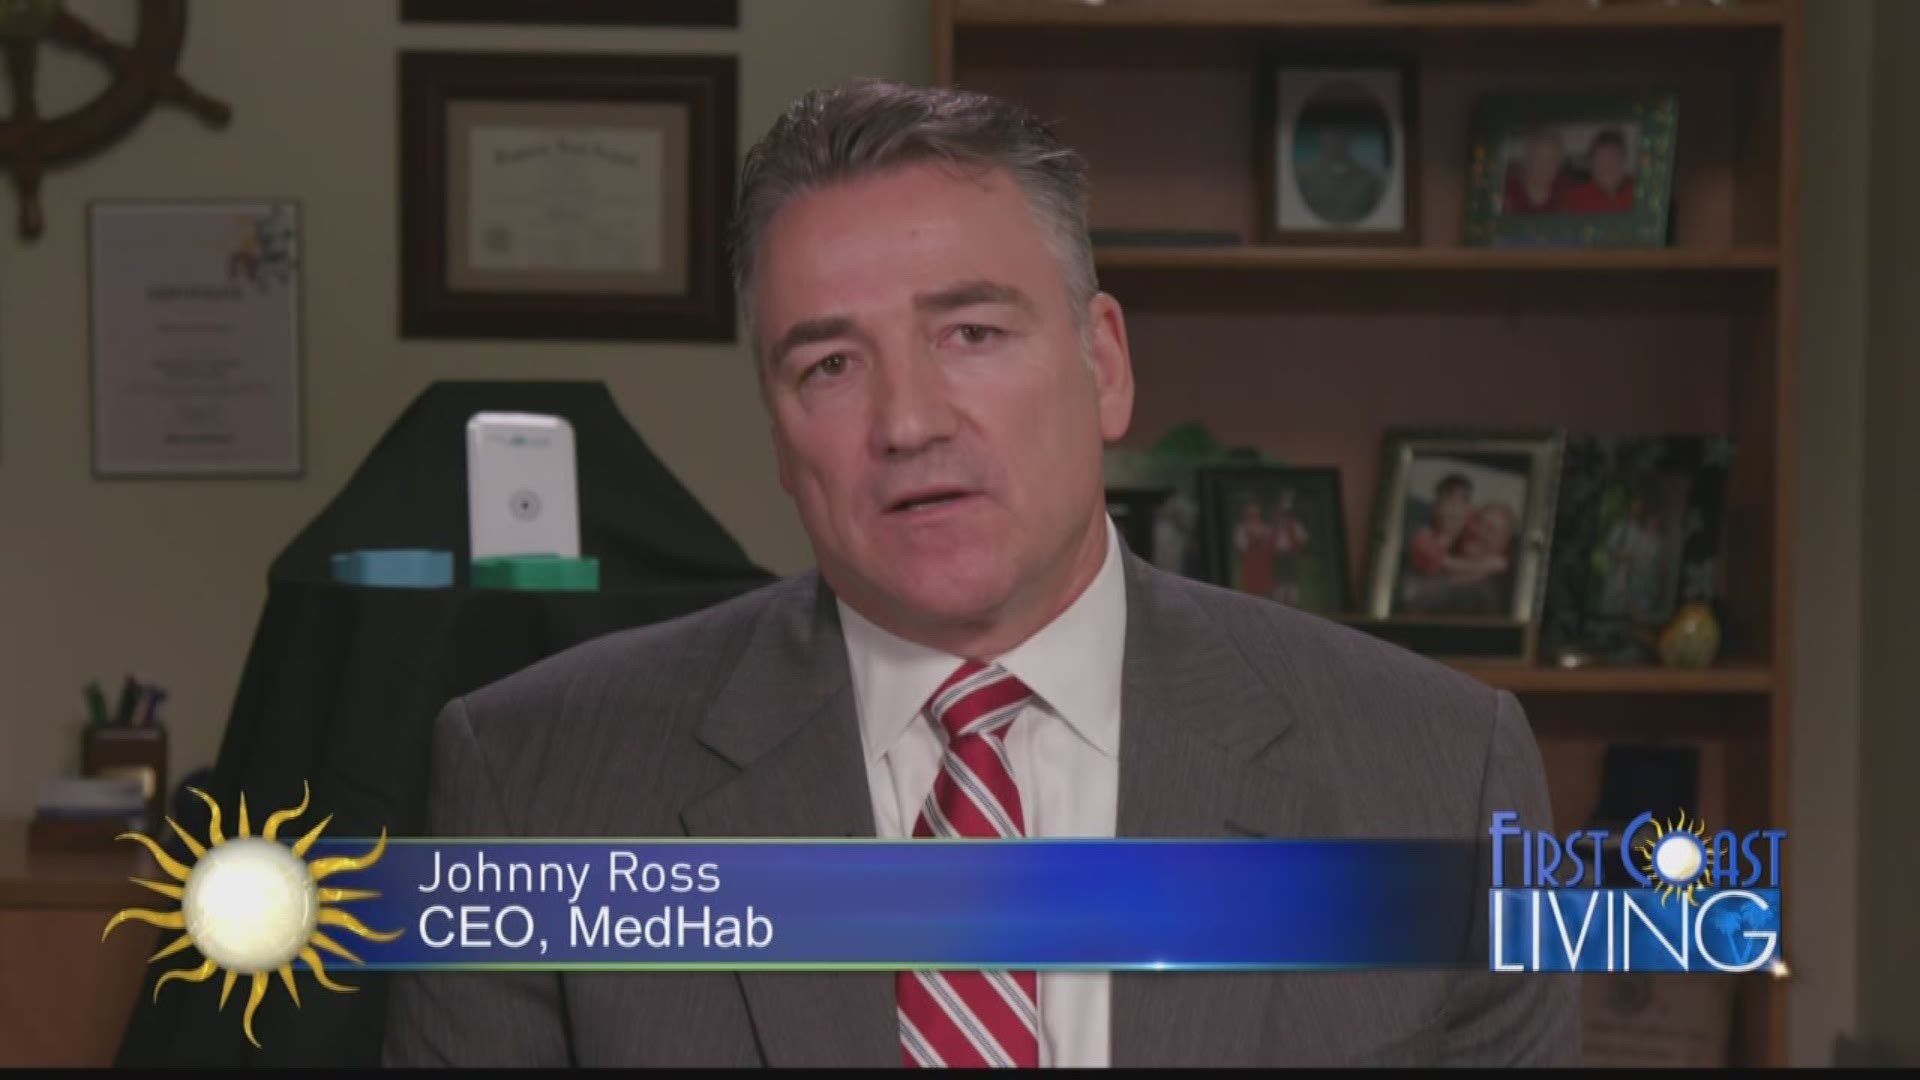 Johnny Ross CEO of MedHab Talks about Fall Protection